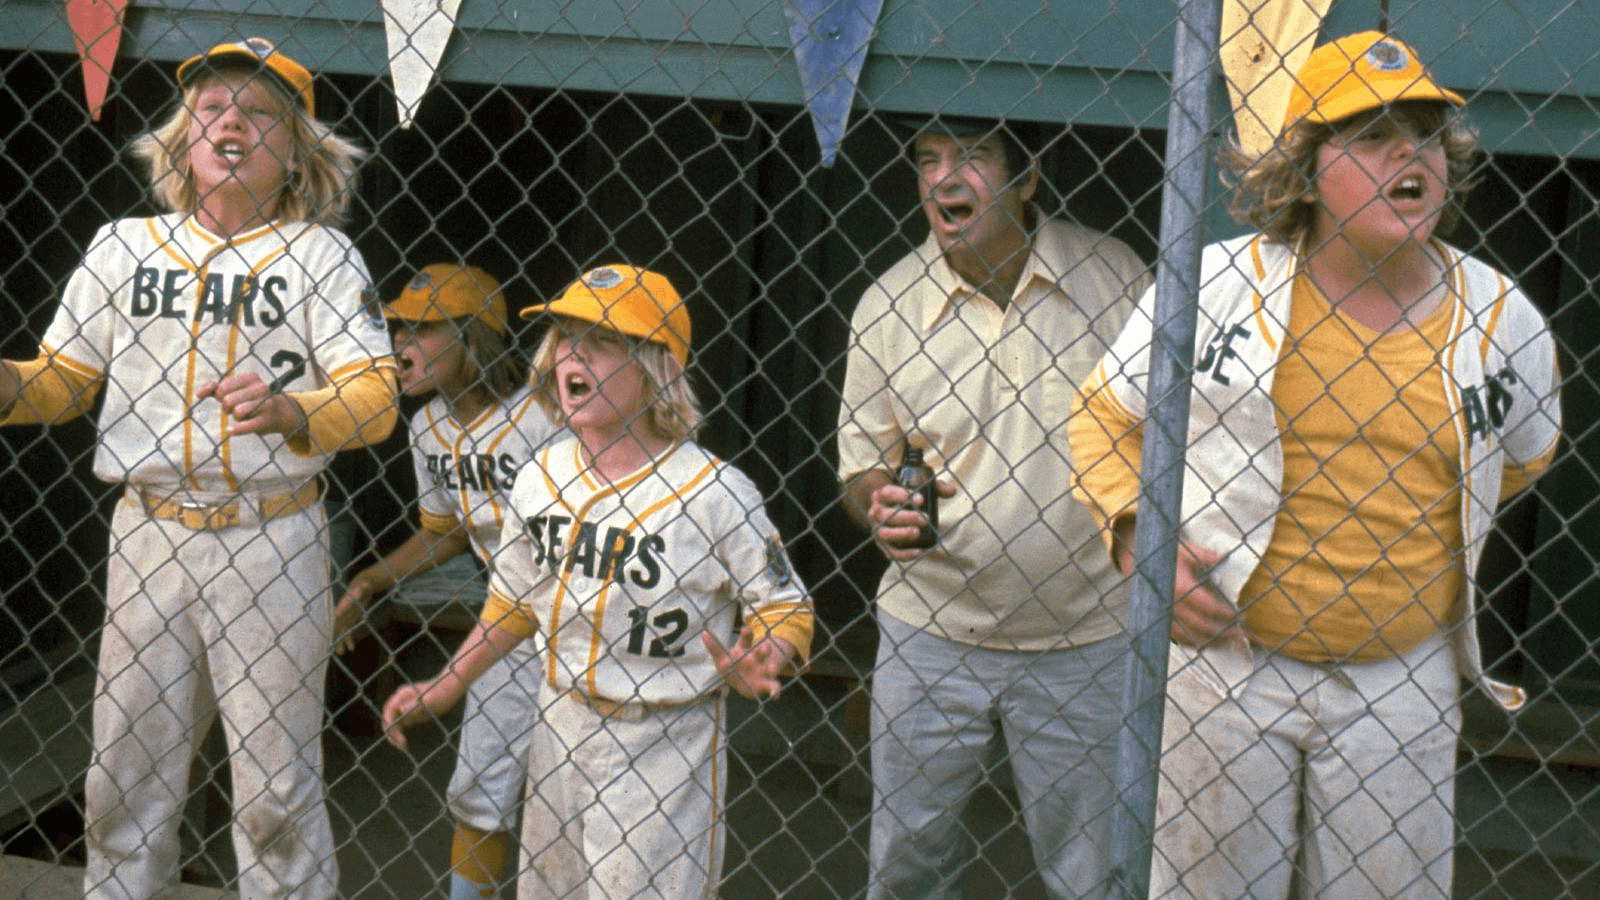 The Bad News Bears is a great commedy about a little league team.